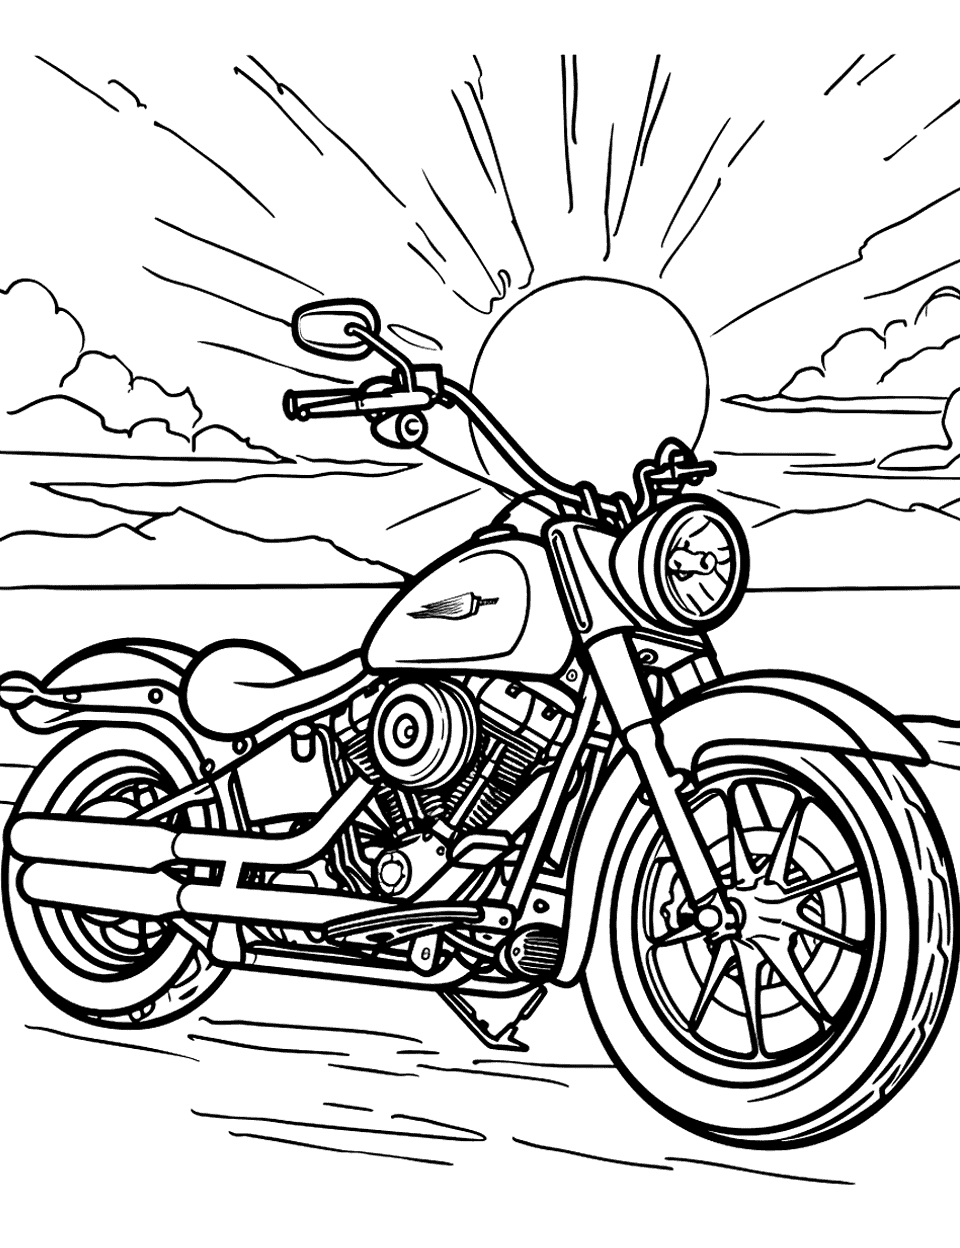 Motorcycle and Sunrise Coloring Page - A motorcycle parked with a beautiful sunrise in the background.